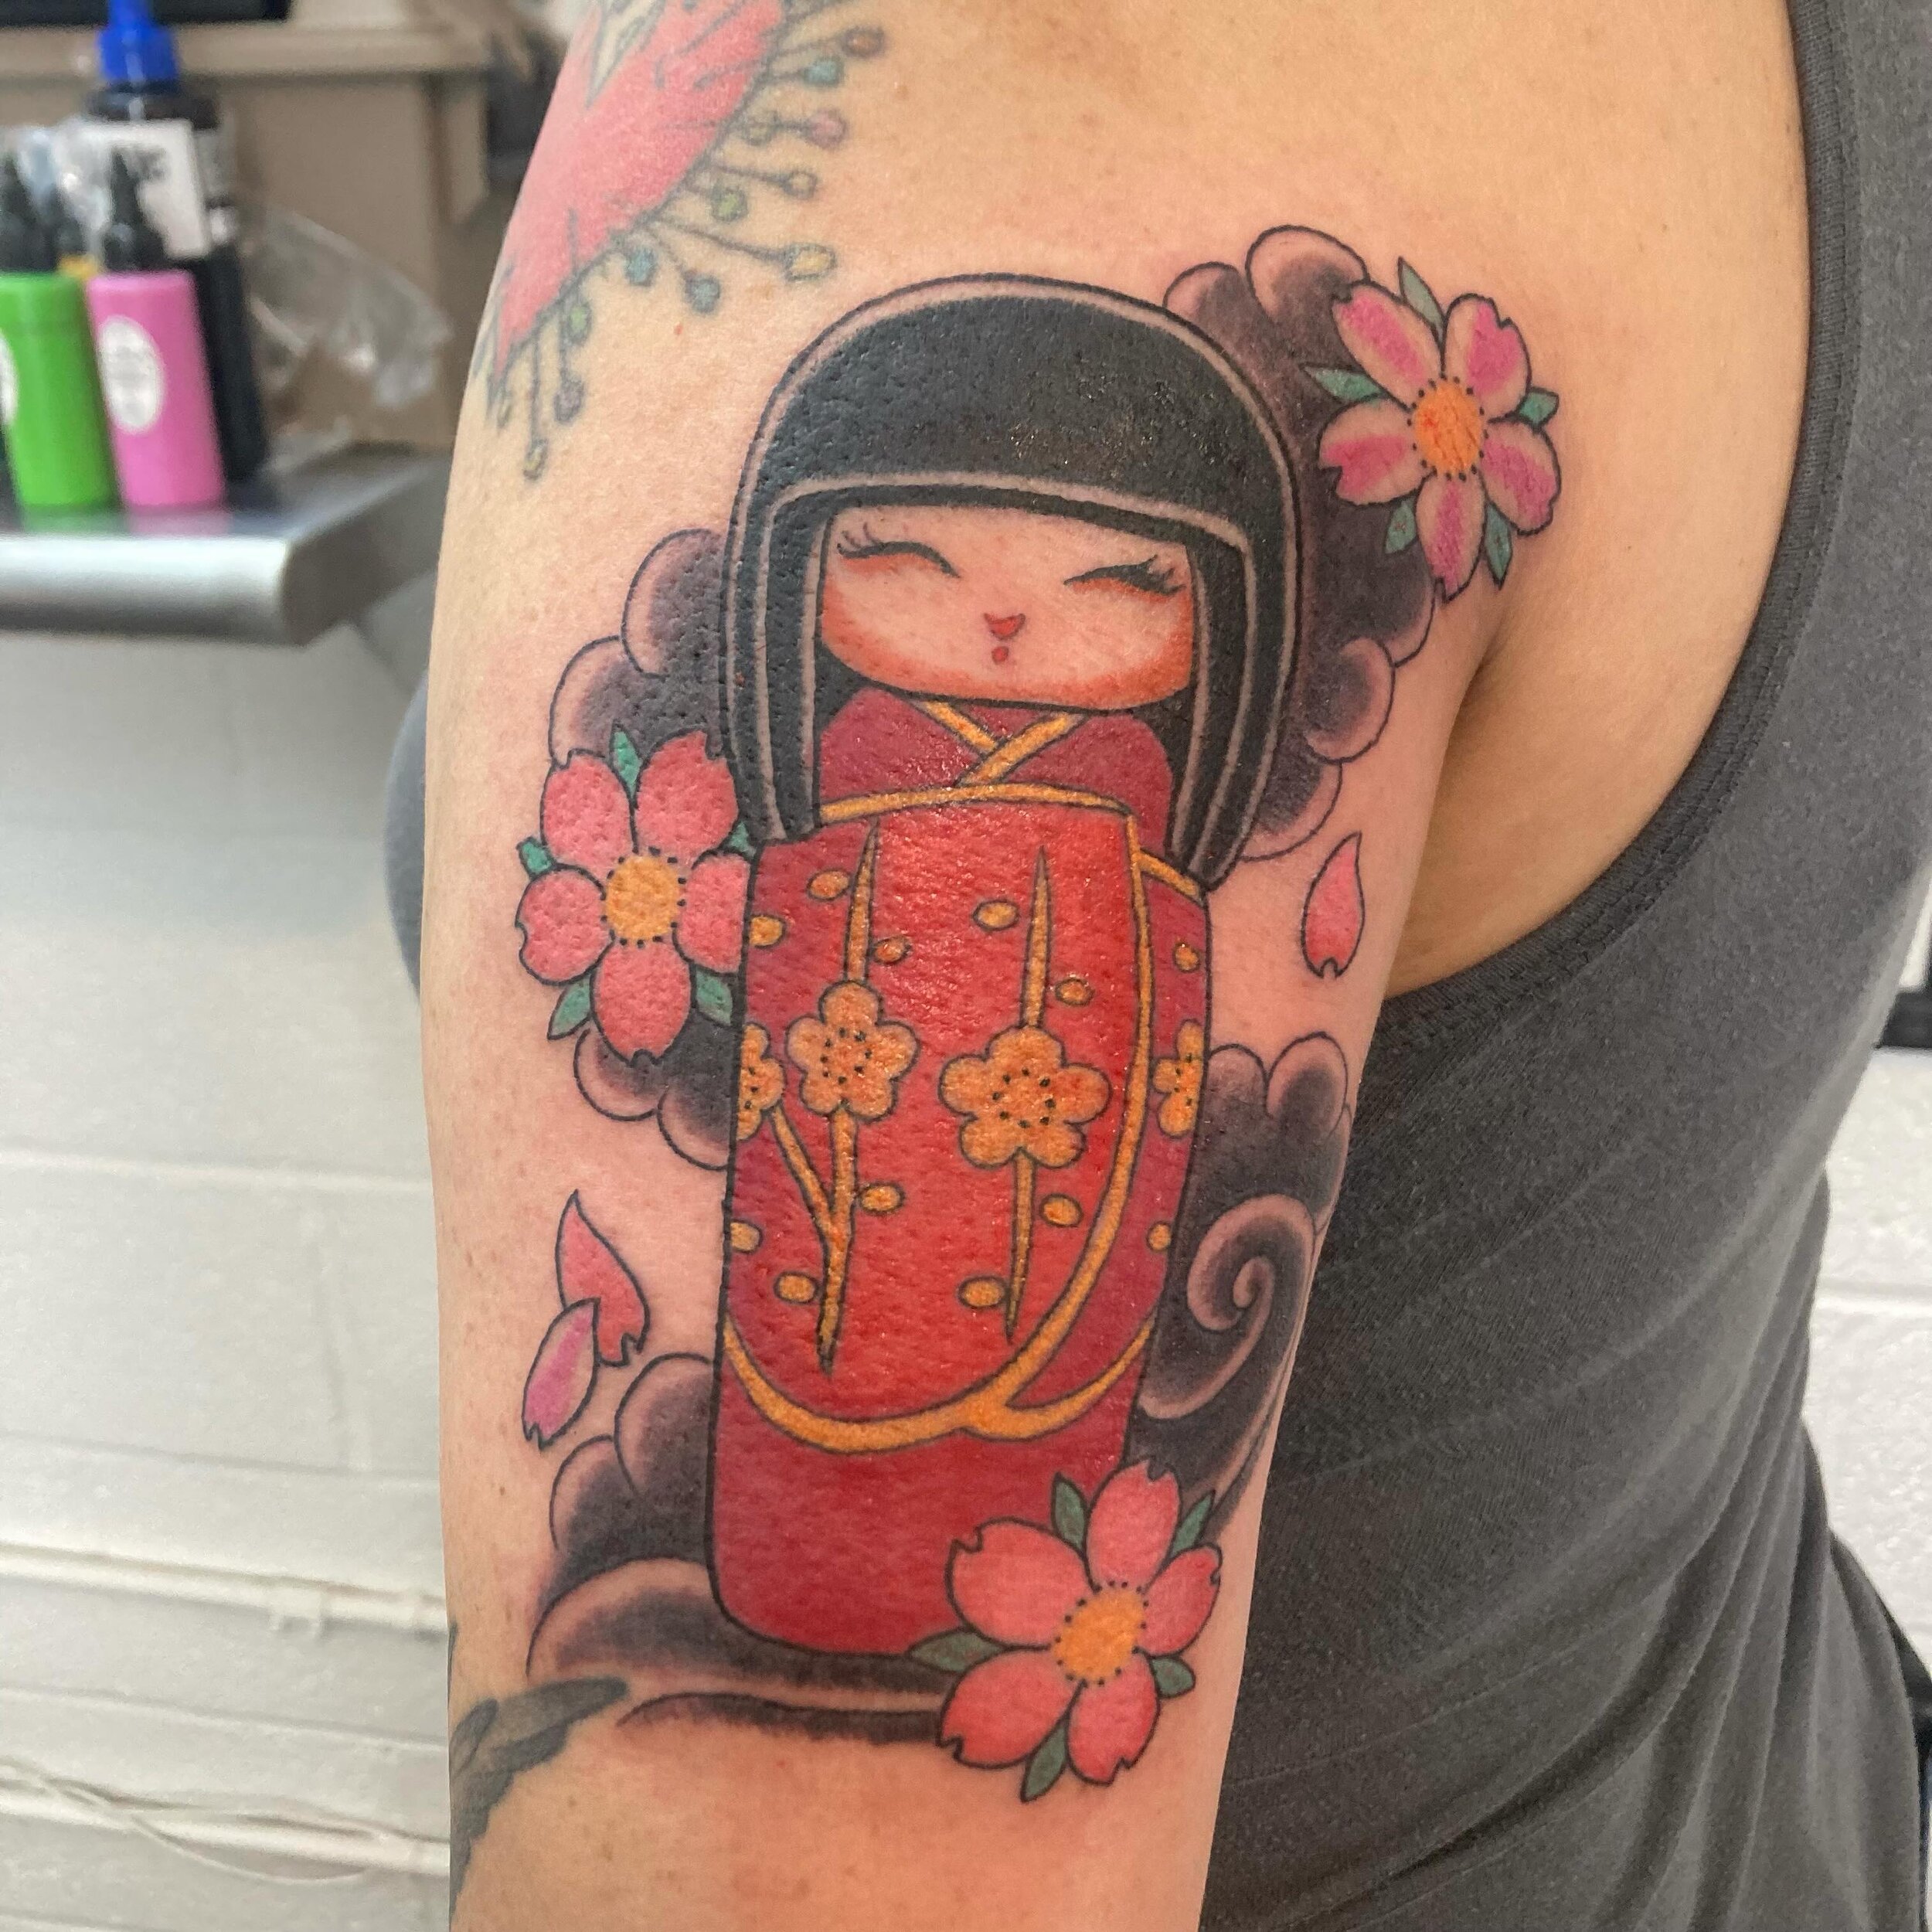 Fun kokishi doll from today at @shoguntattoo Thanks for coming through Melinda!  It was great to catch up.